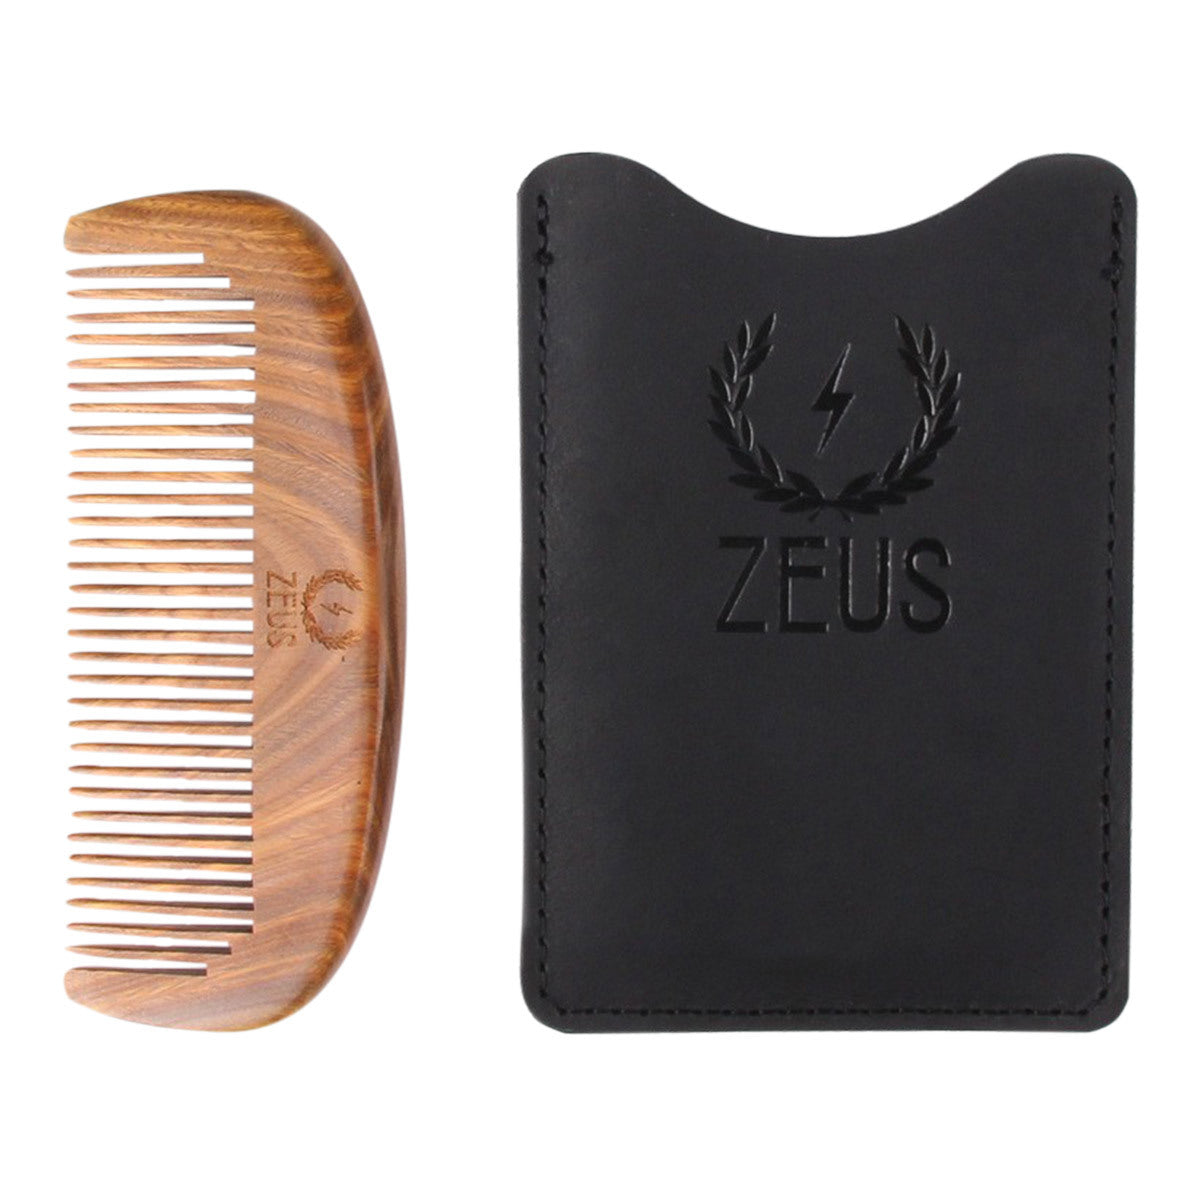 Primary image of Zeus Organic Sandalwood Beard Comb with Leather Sheath 5 inches Comb